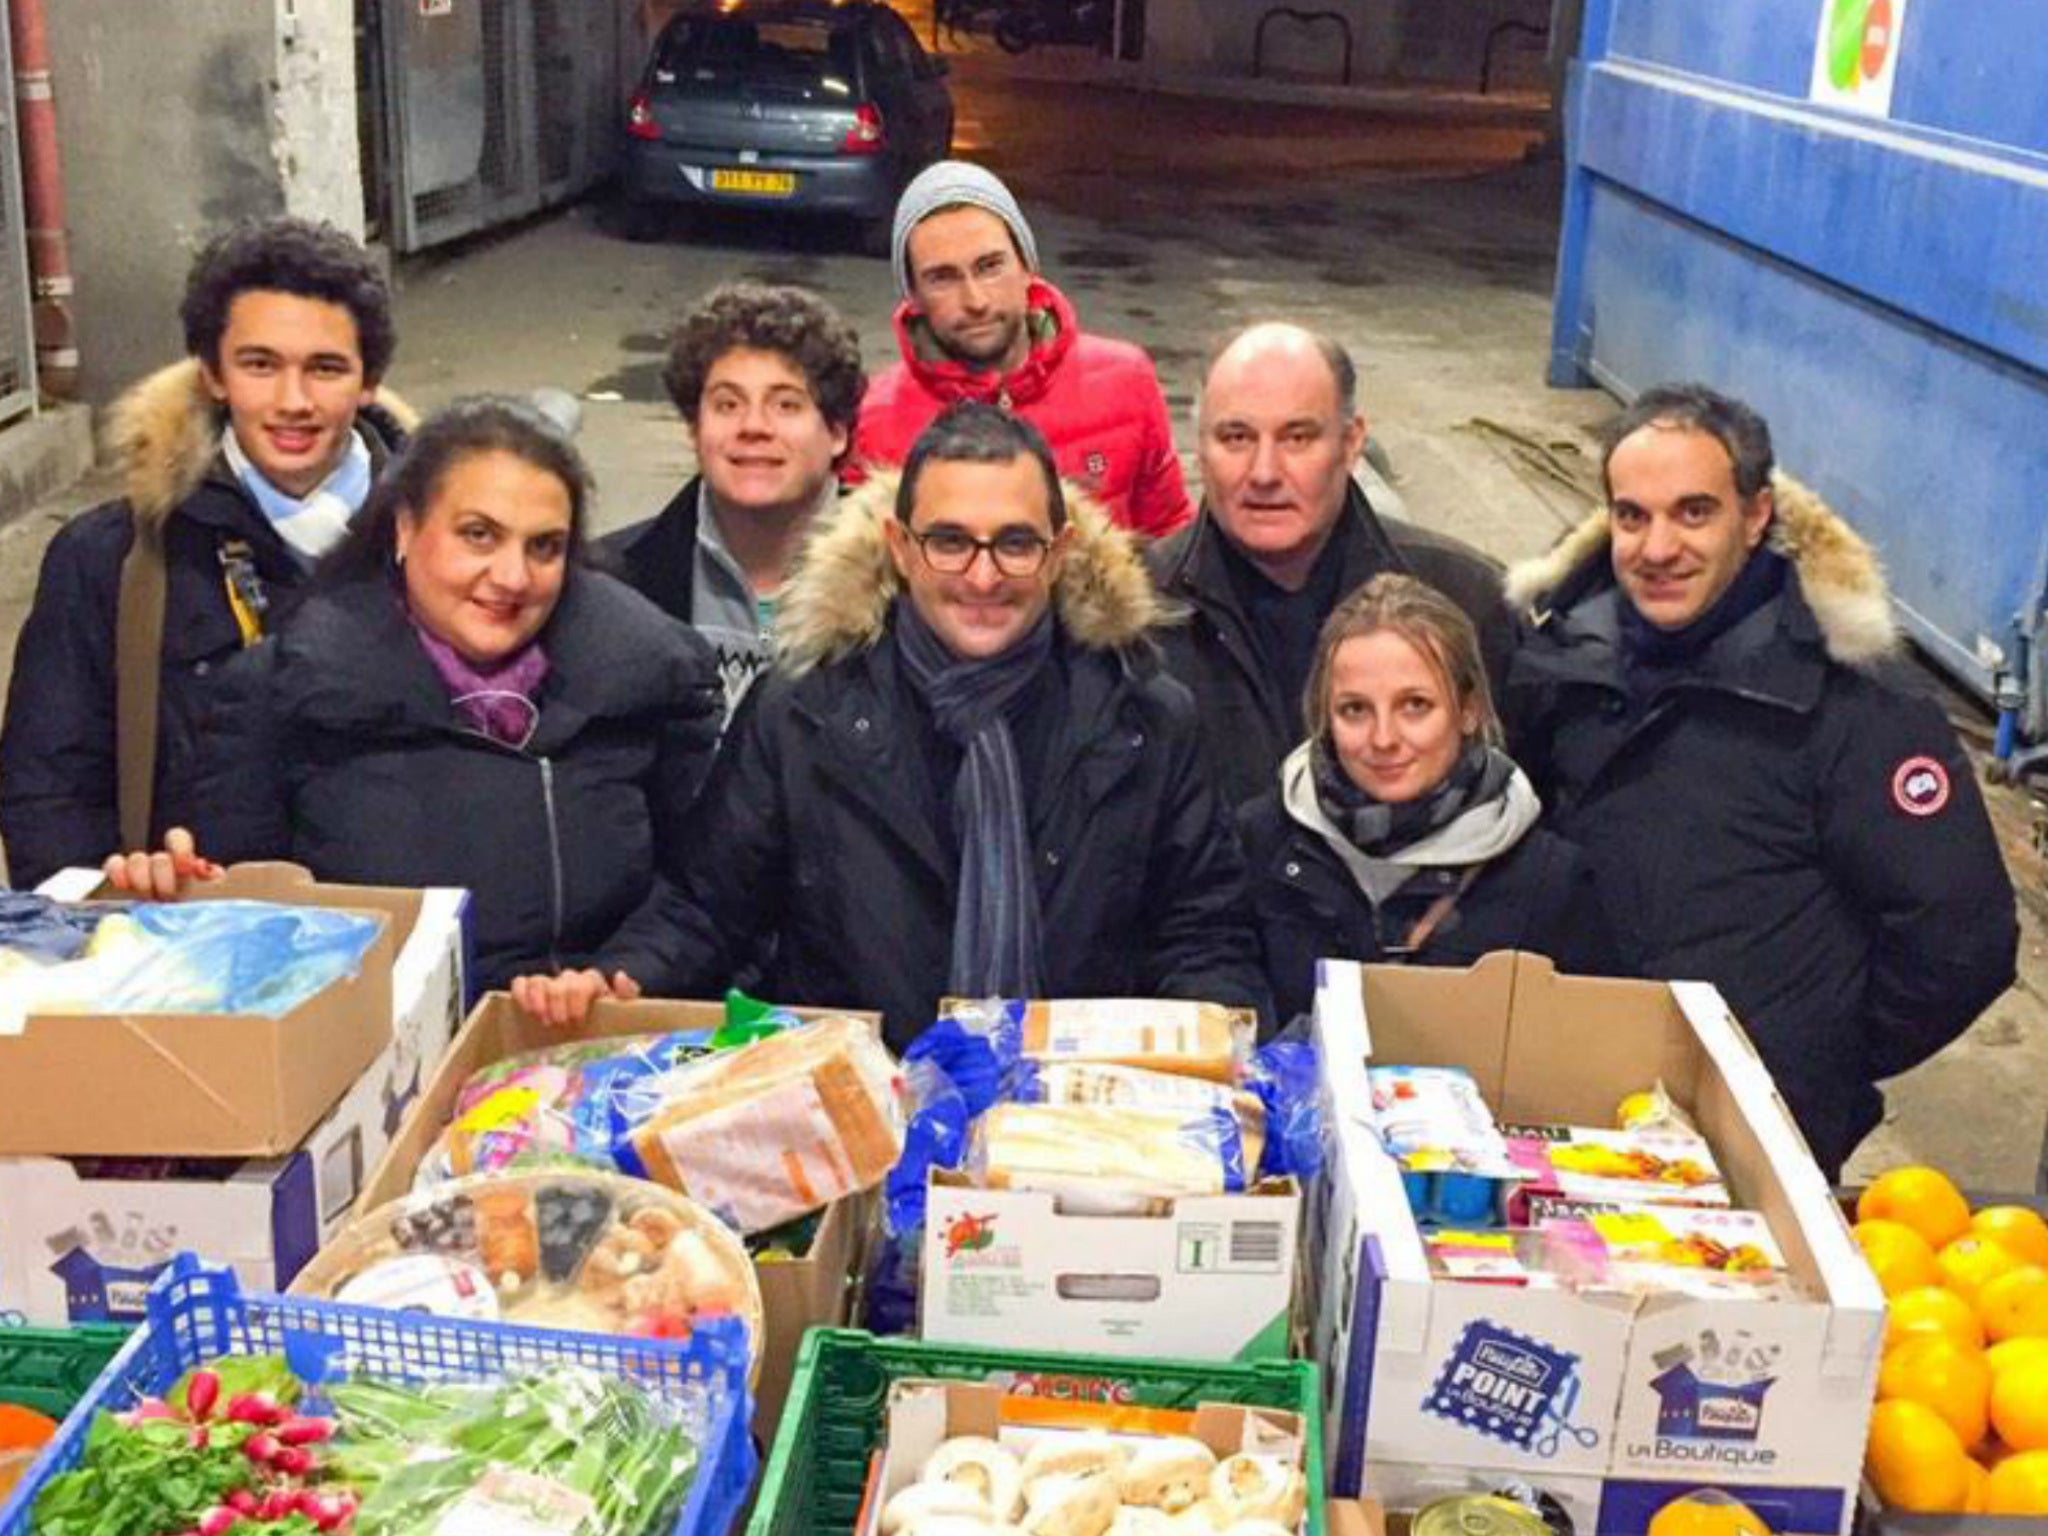 The author with friends and volunteers with saved supermarket food in Courbevoie